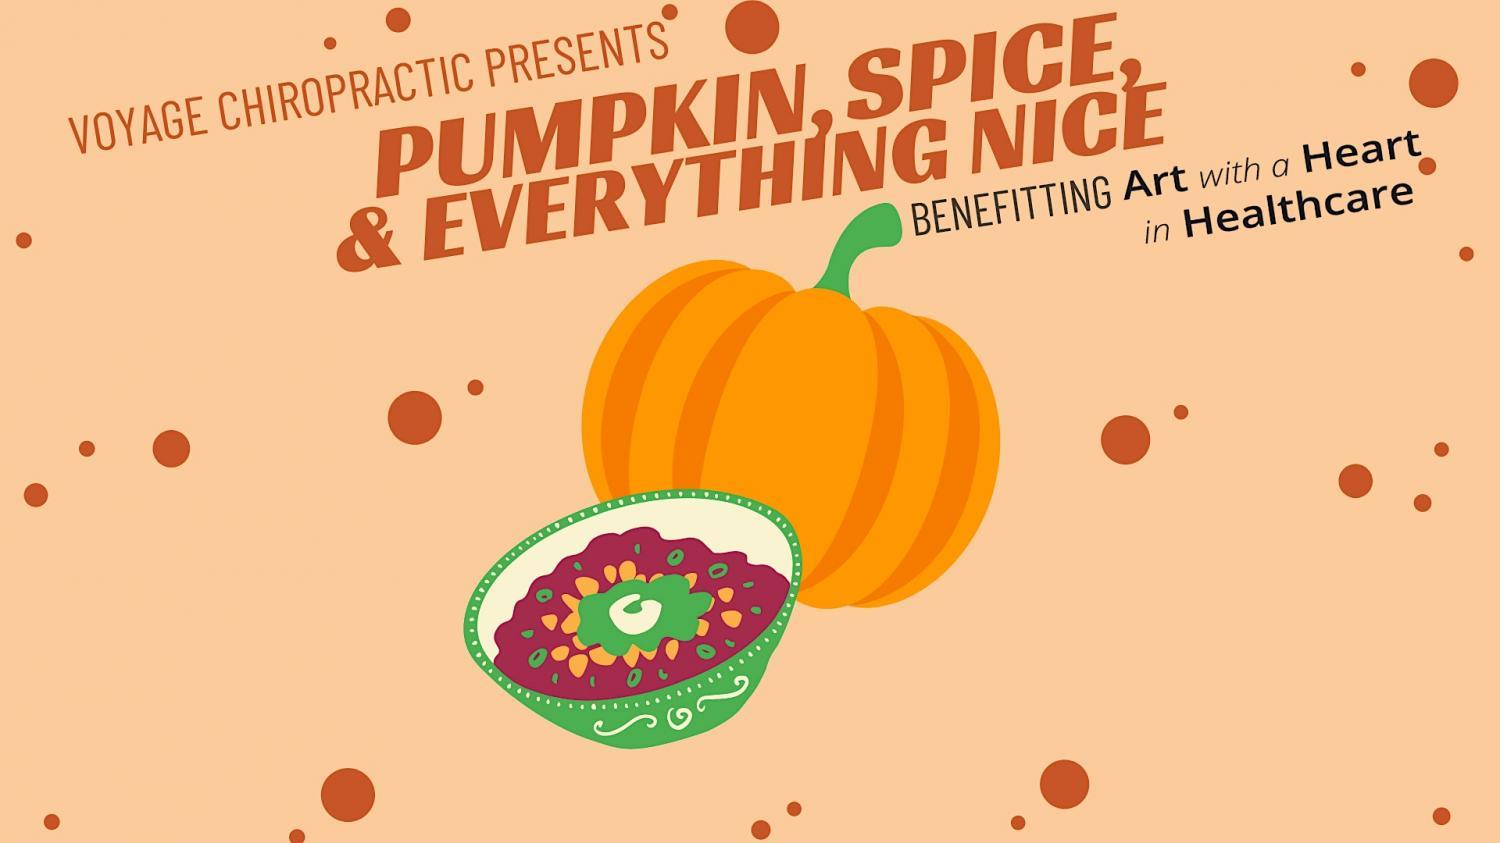 Pumpkin, Spice, and Everything Nice
Fri Oct 21, 7:00 PM - Fri Oct 21, 7:00 PM
in 2 days